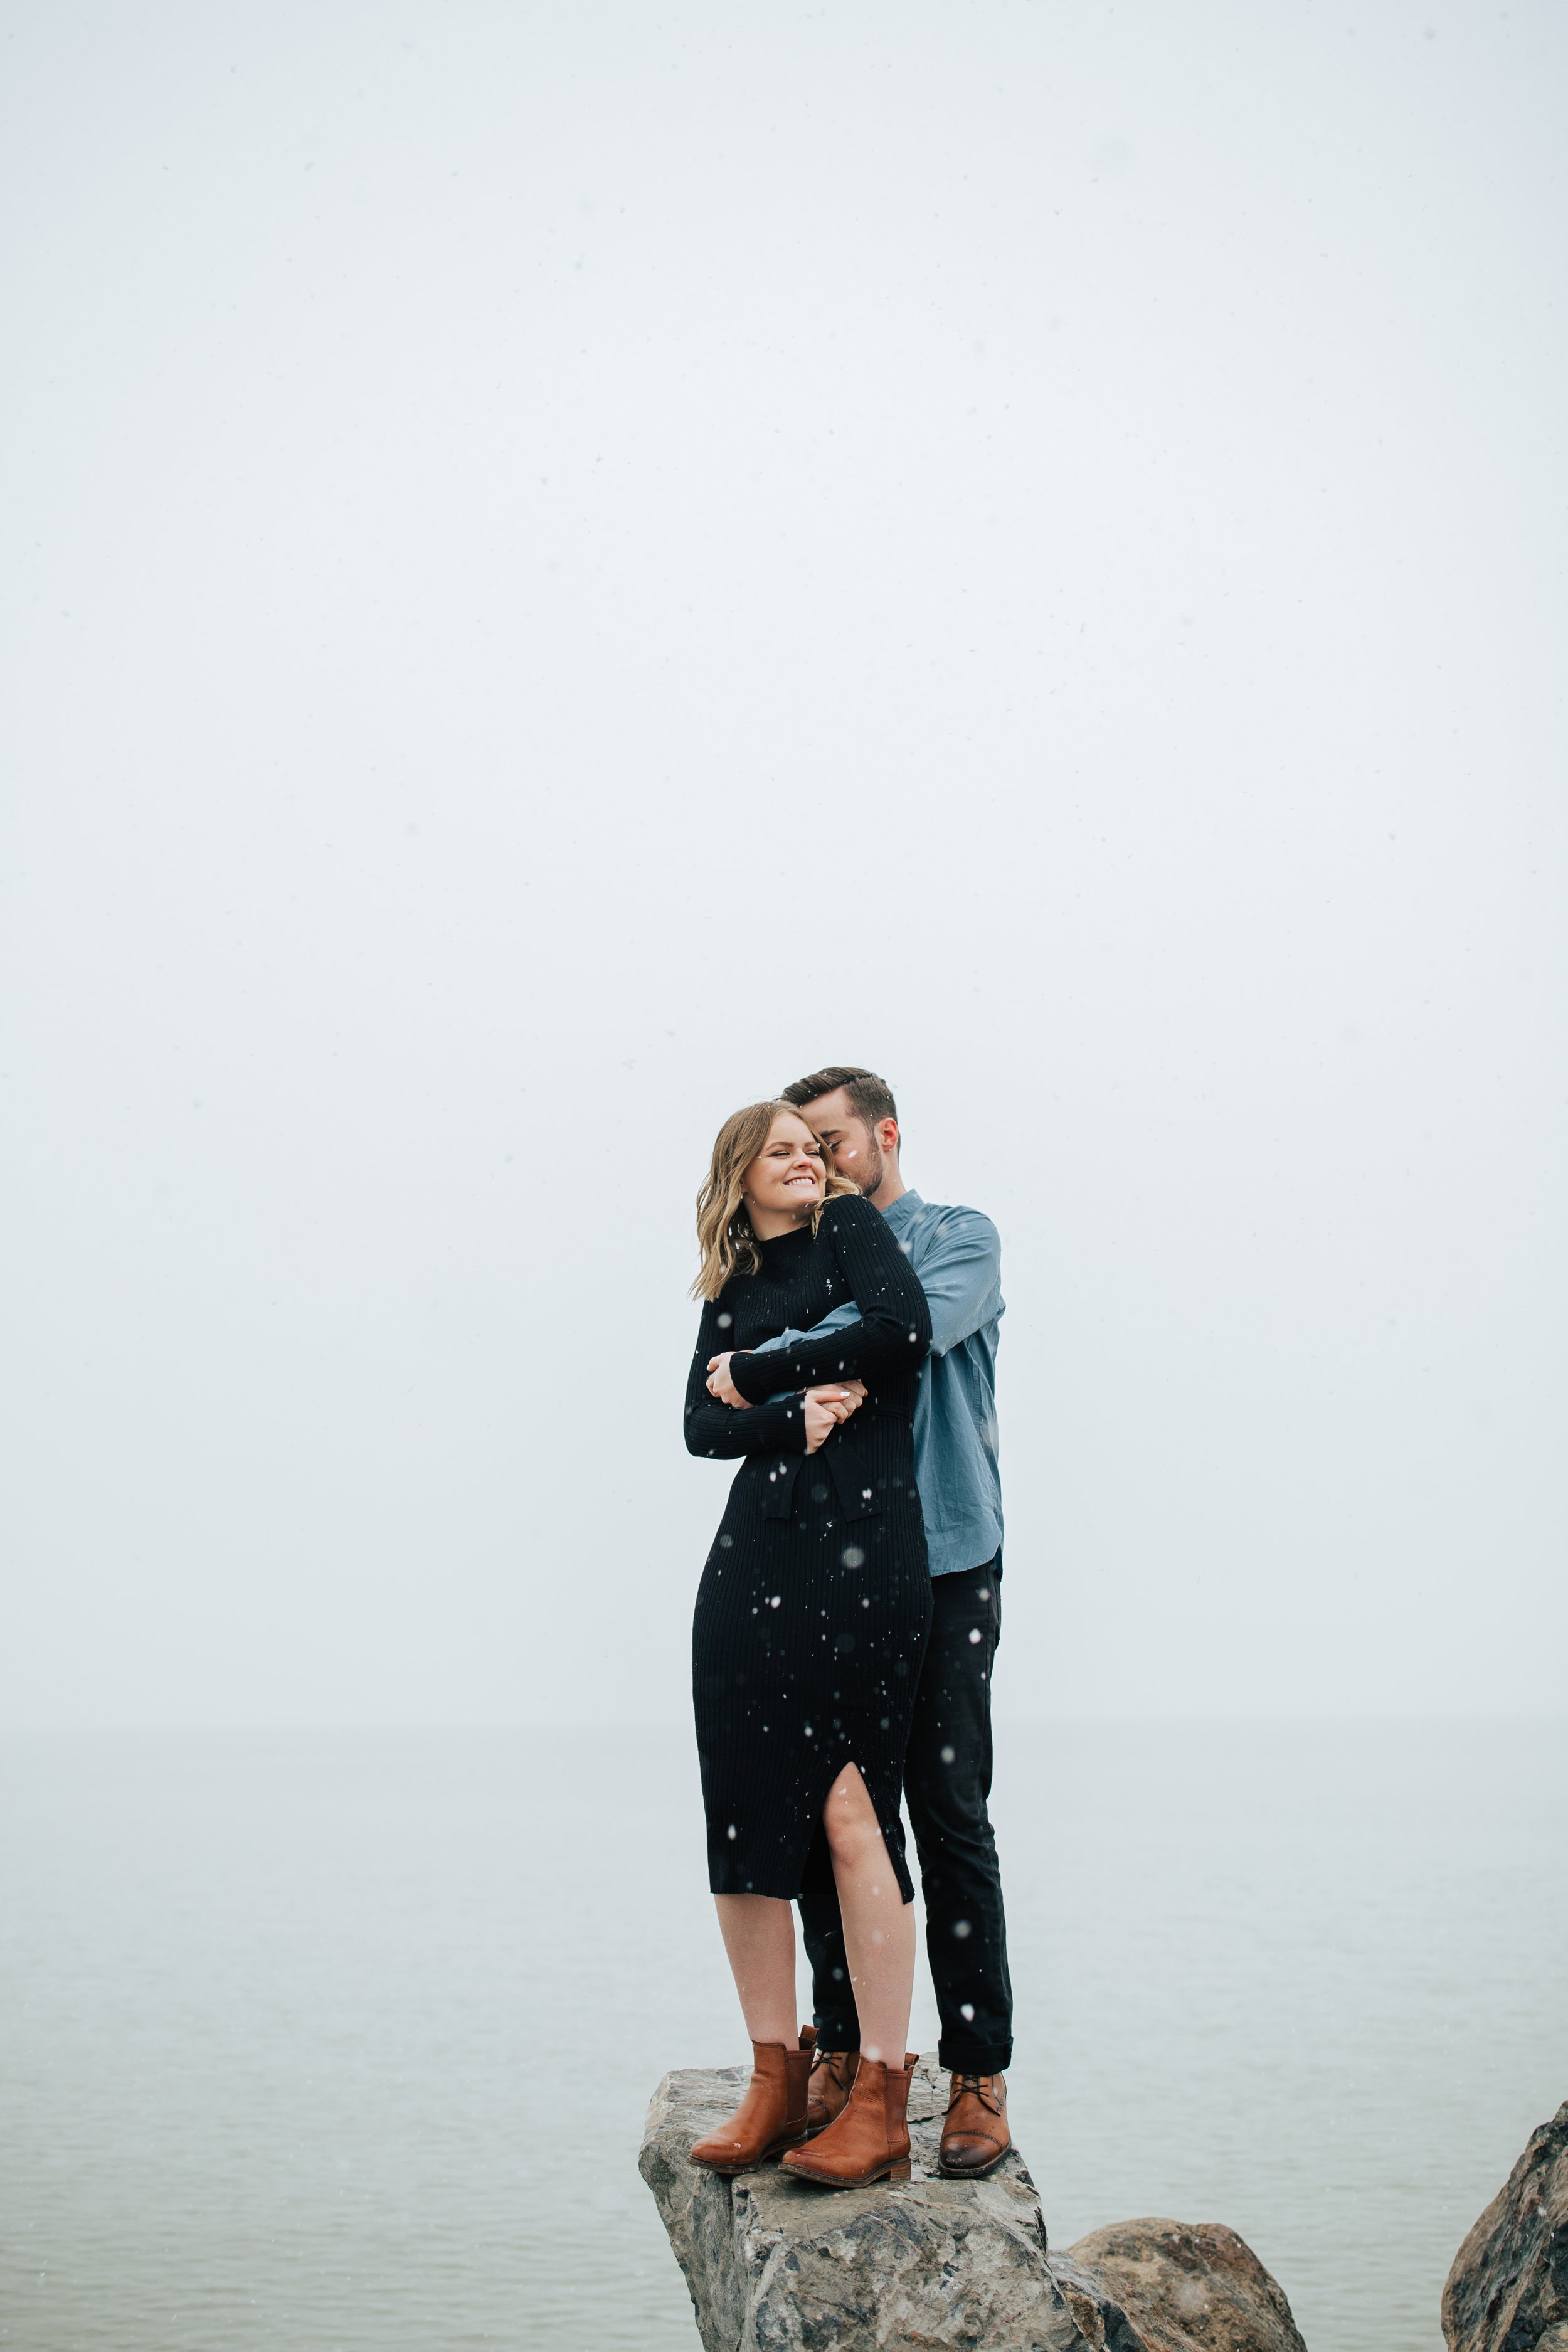  Winter photoshoot outfit inspo. Man and woman kiss in the snowy mountains. Utah mountain engagement shoot in the winter. Park City, Utah photographer. #winter #engagements #engagementsession #utahphotoshoot #utahengagements 